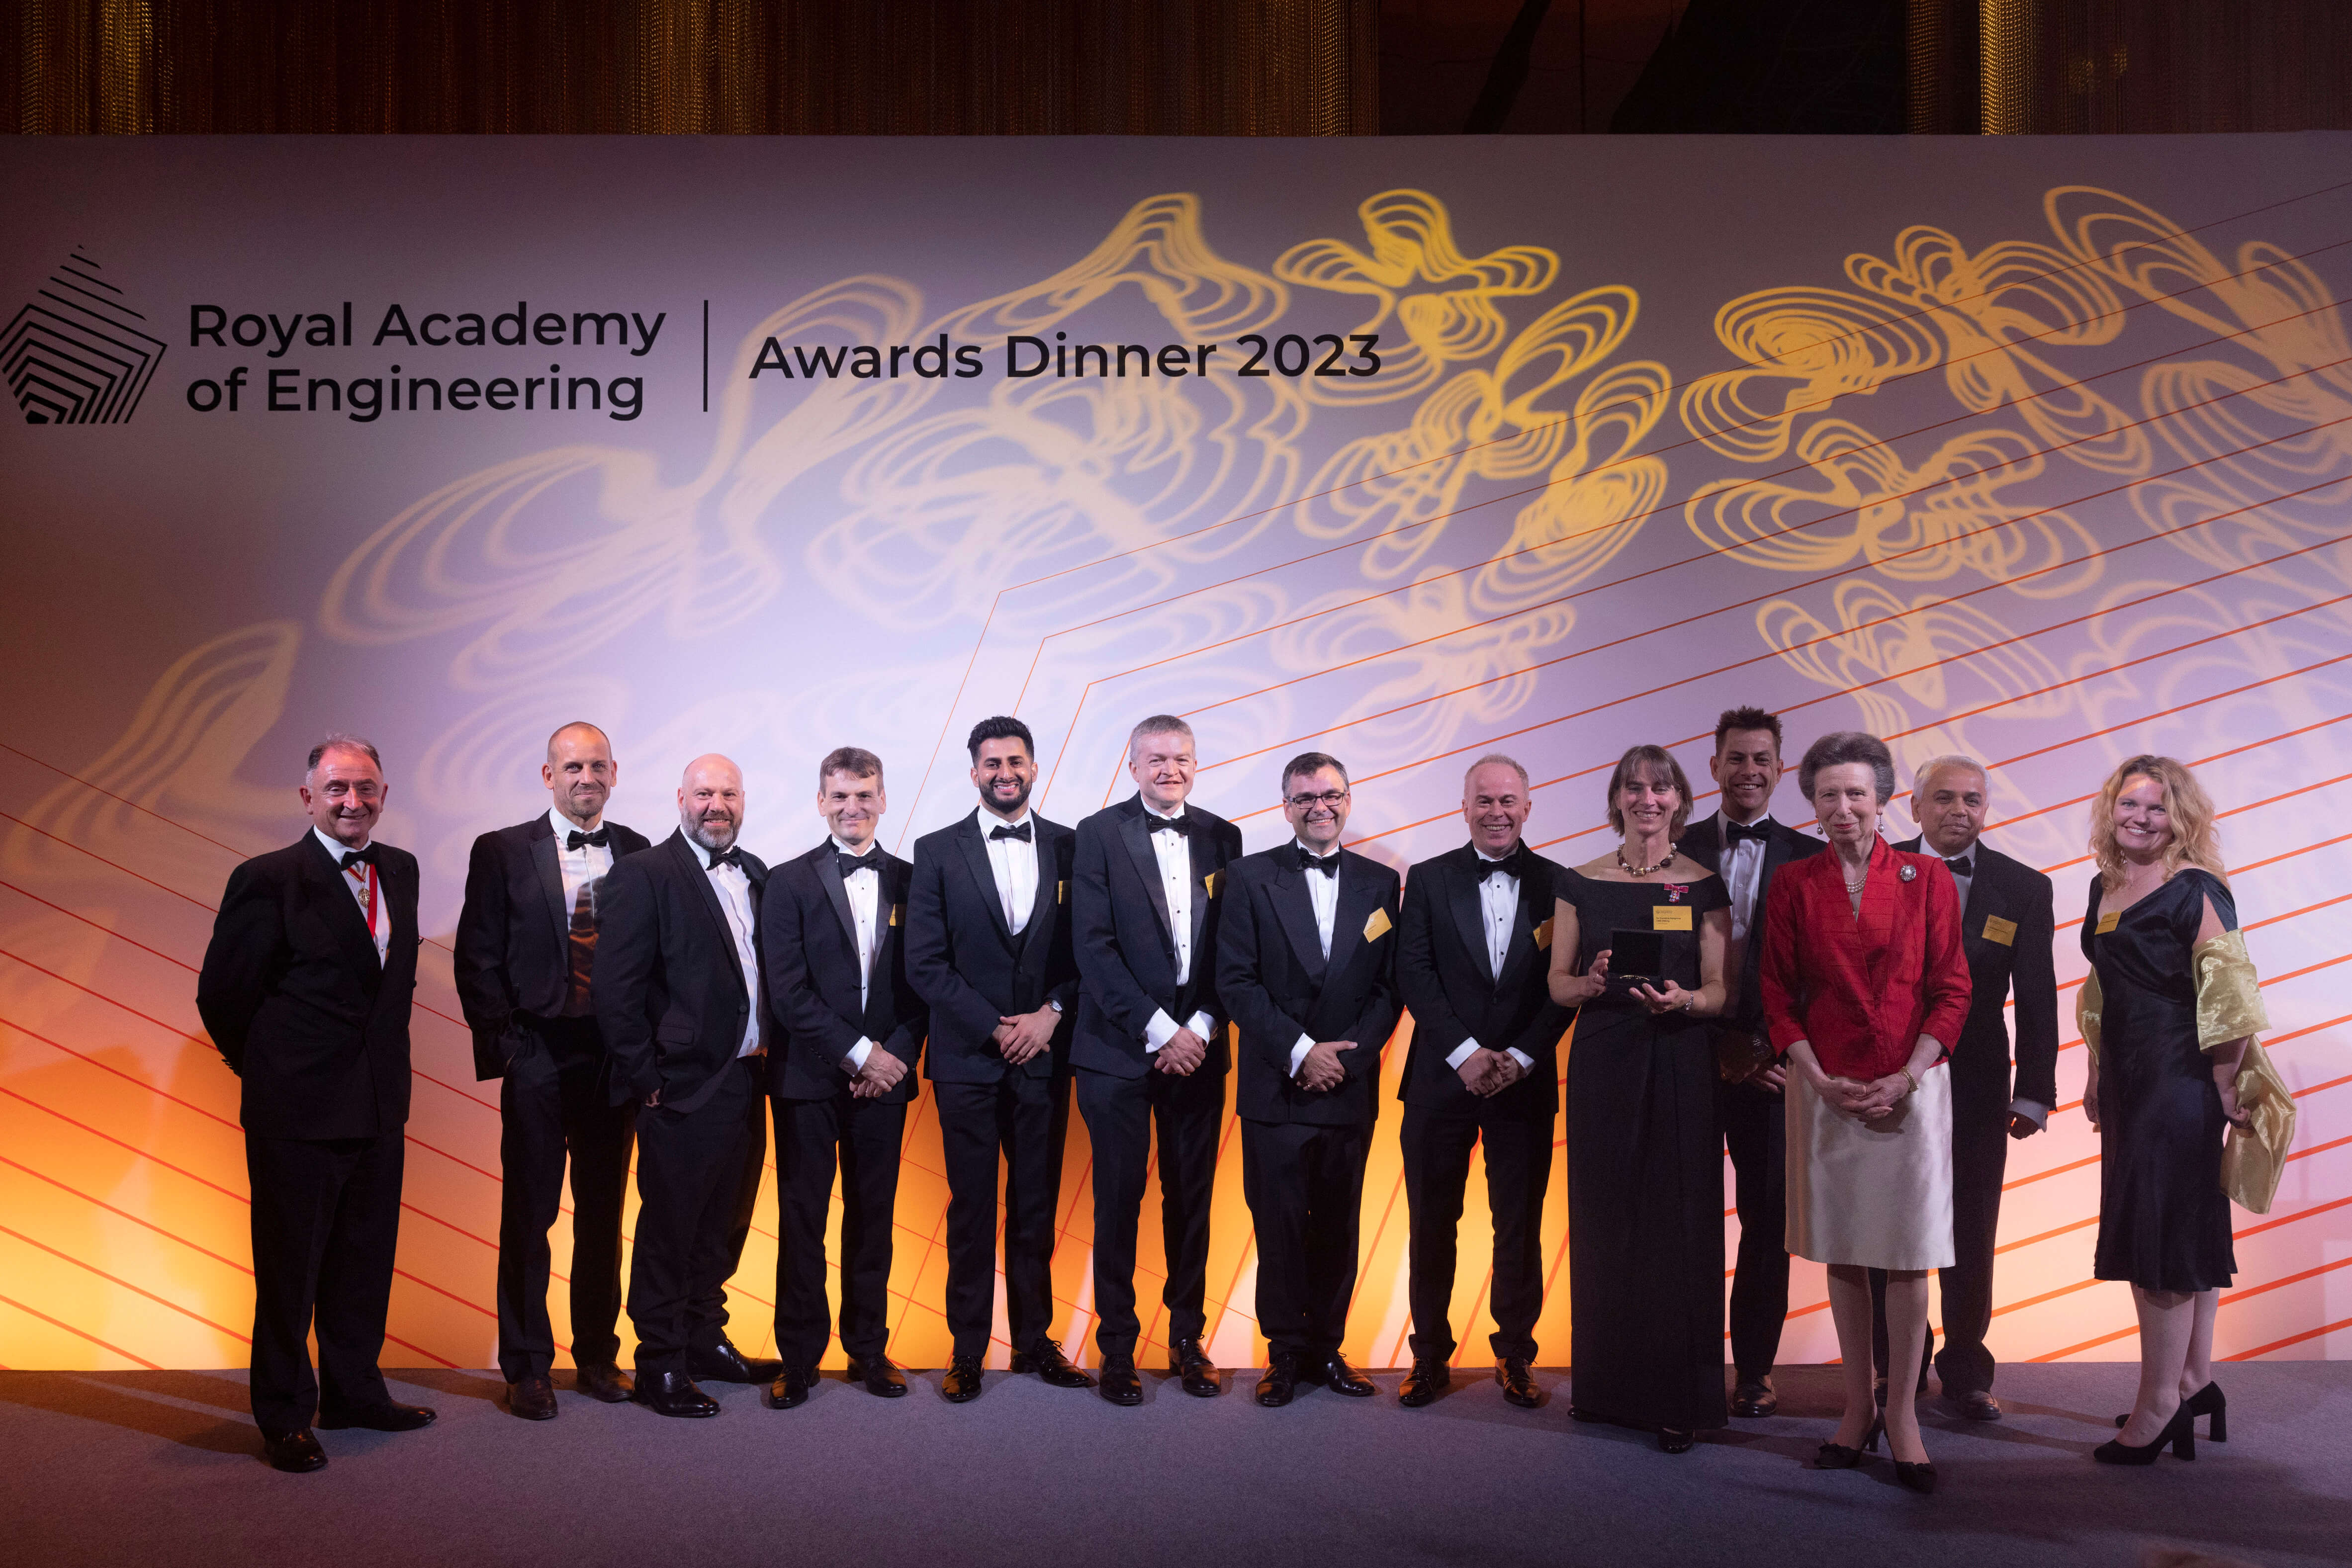 The Ceres Power Team with Academy President Professor Sir Jim McDonald FREng FRSE (left) and HRH The Princess Royal (third from right). Image credit: Jason Alden